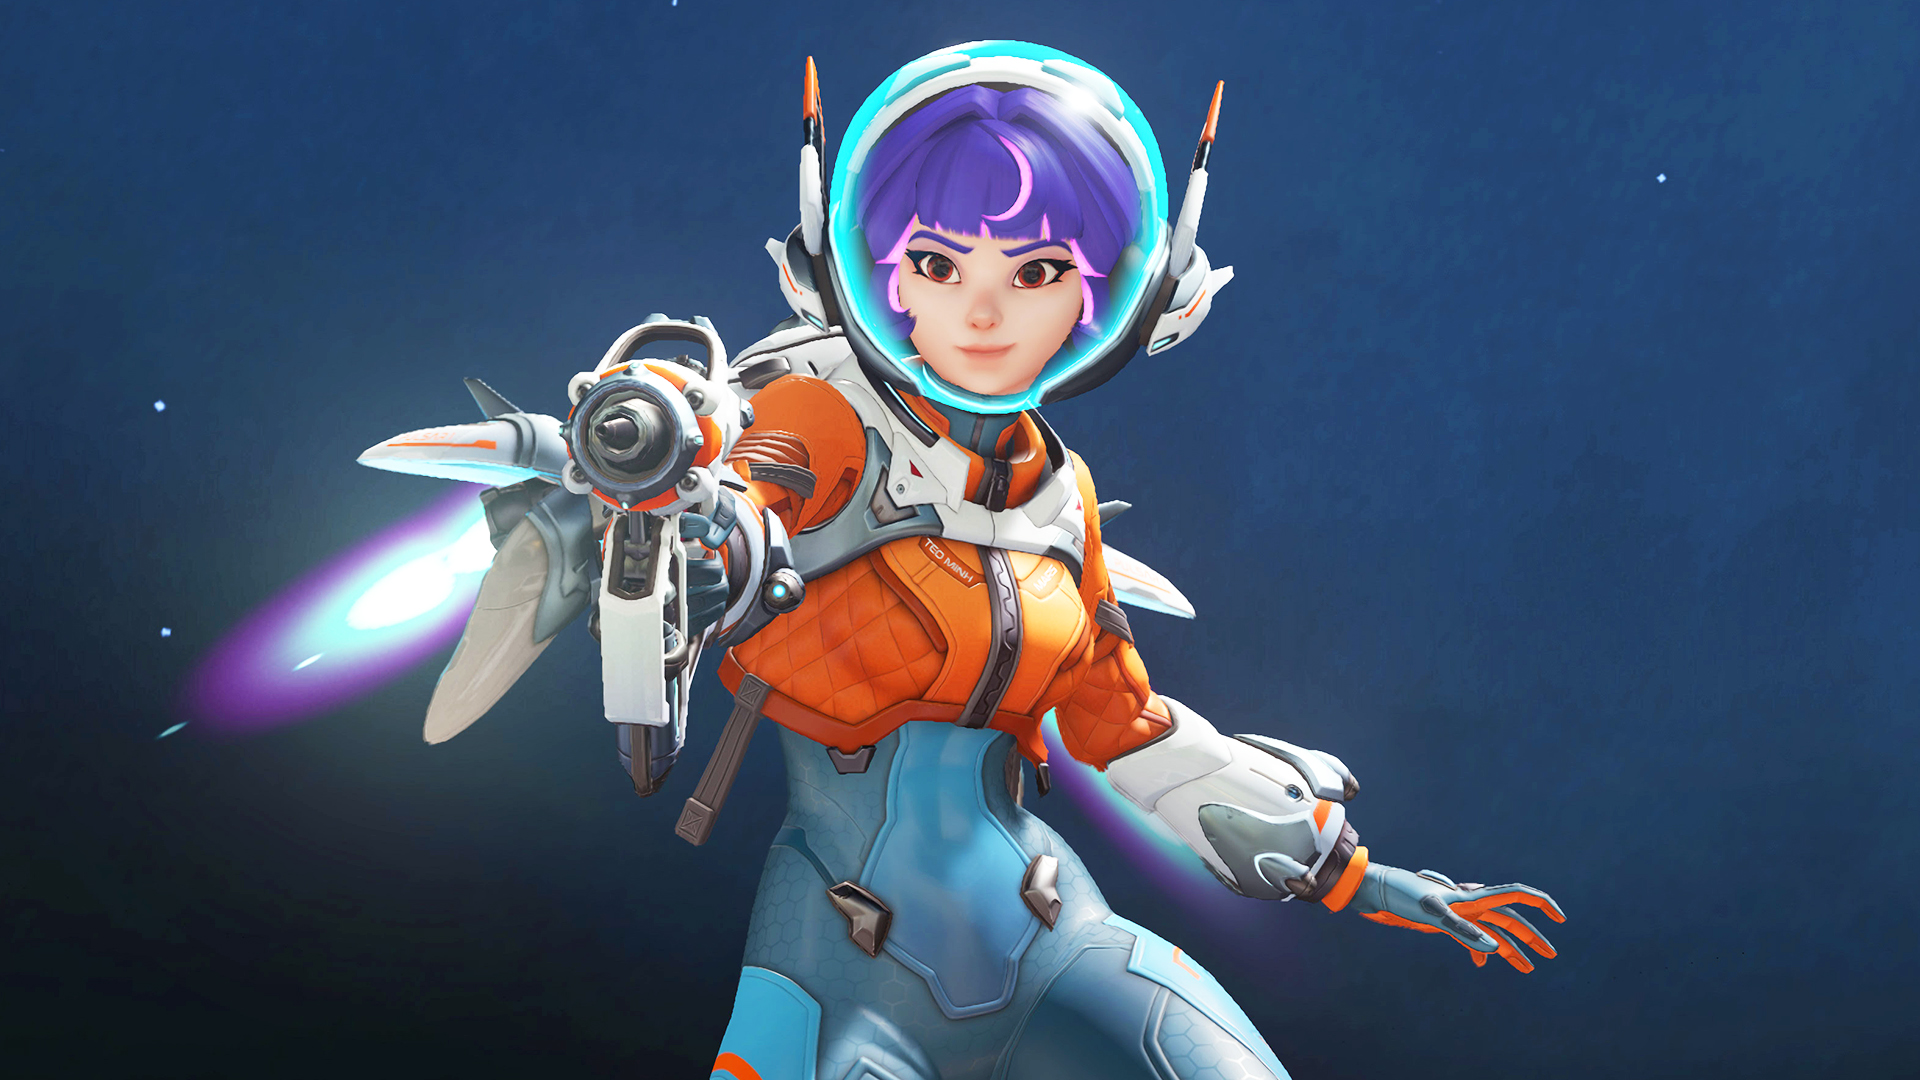  Overwatch 2's new space girl healer takes the throne as one of the most strategically satisfying heroes in the game 